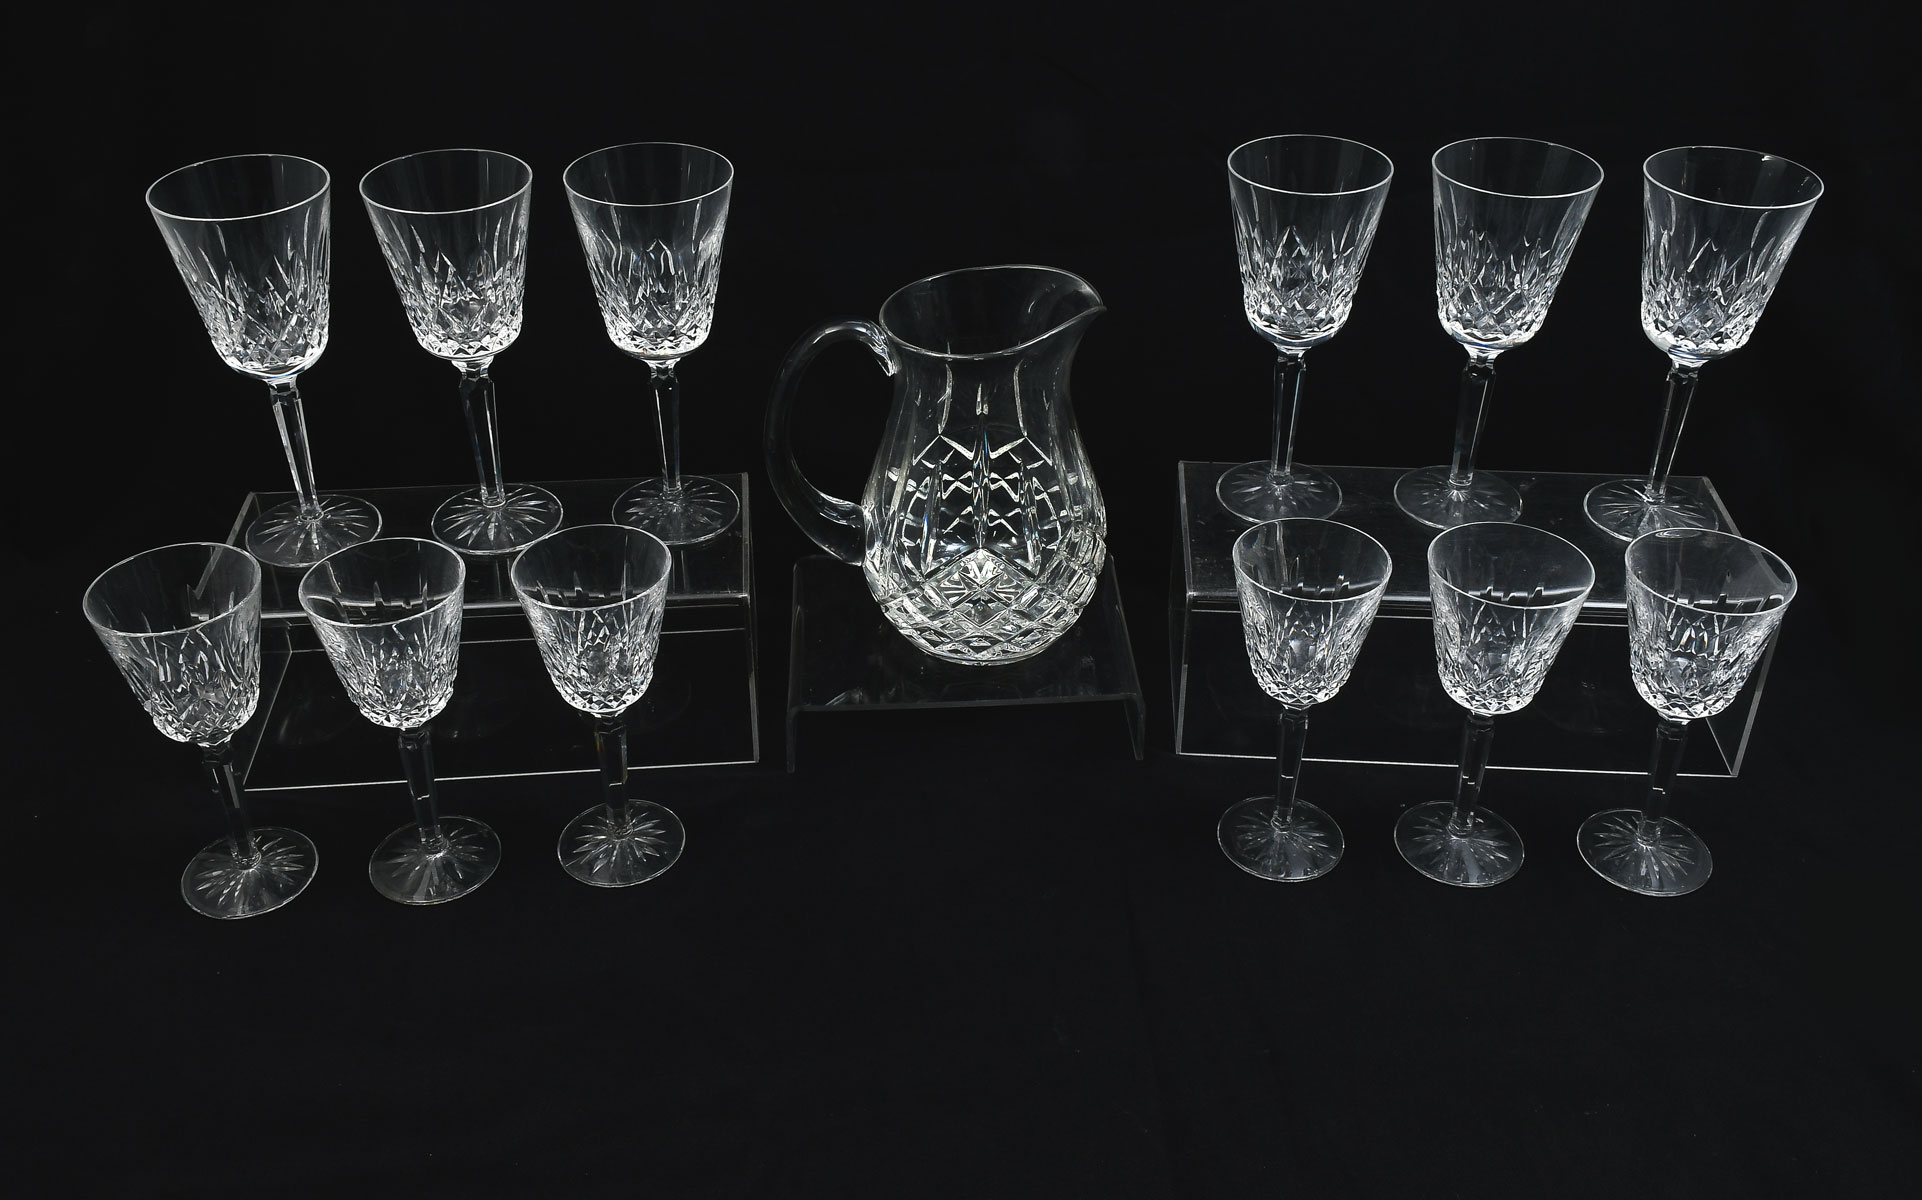 13 PIECE WATERFORD LISMORE GLASSES 36c24a